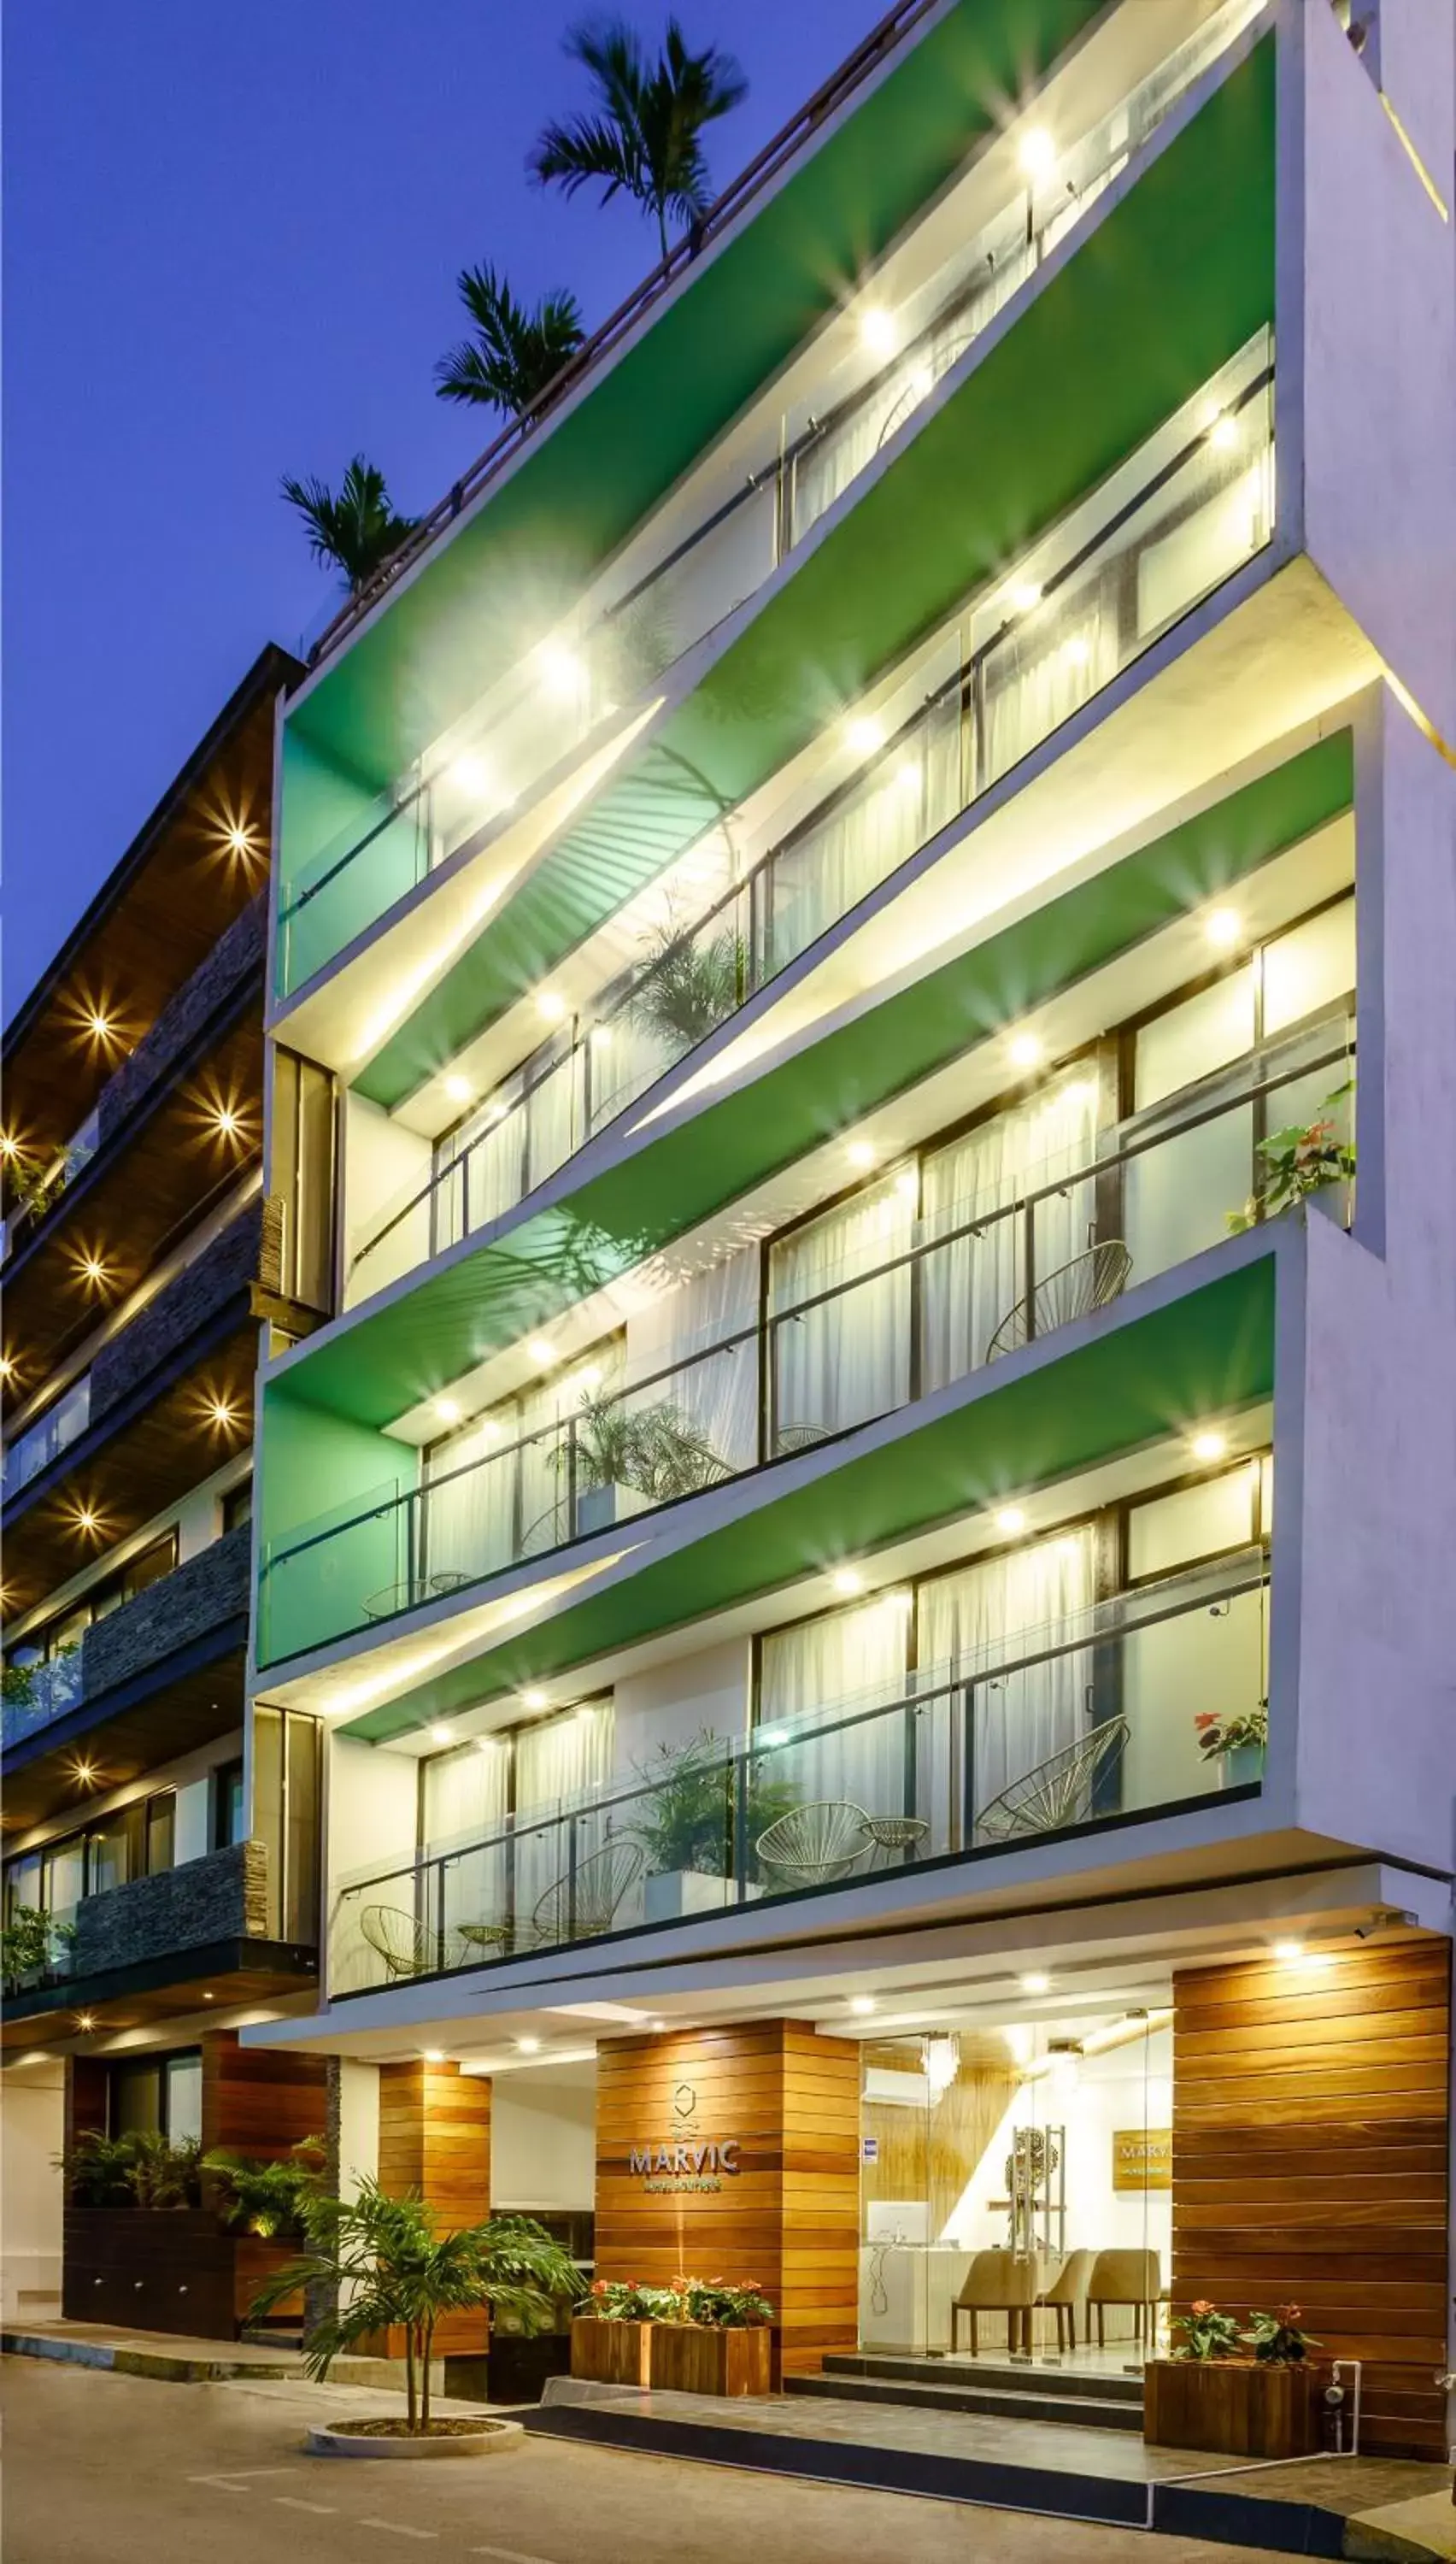 Property Building in Marvic Hotel Boutique